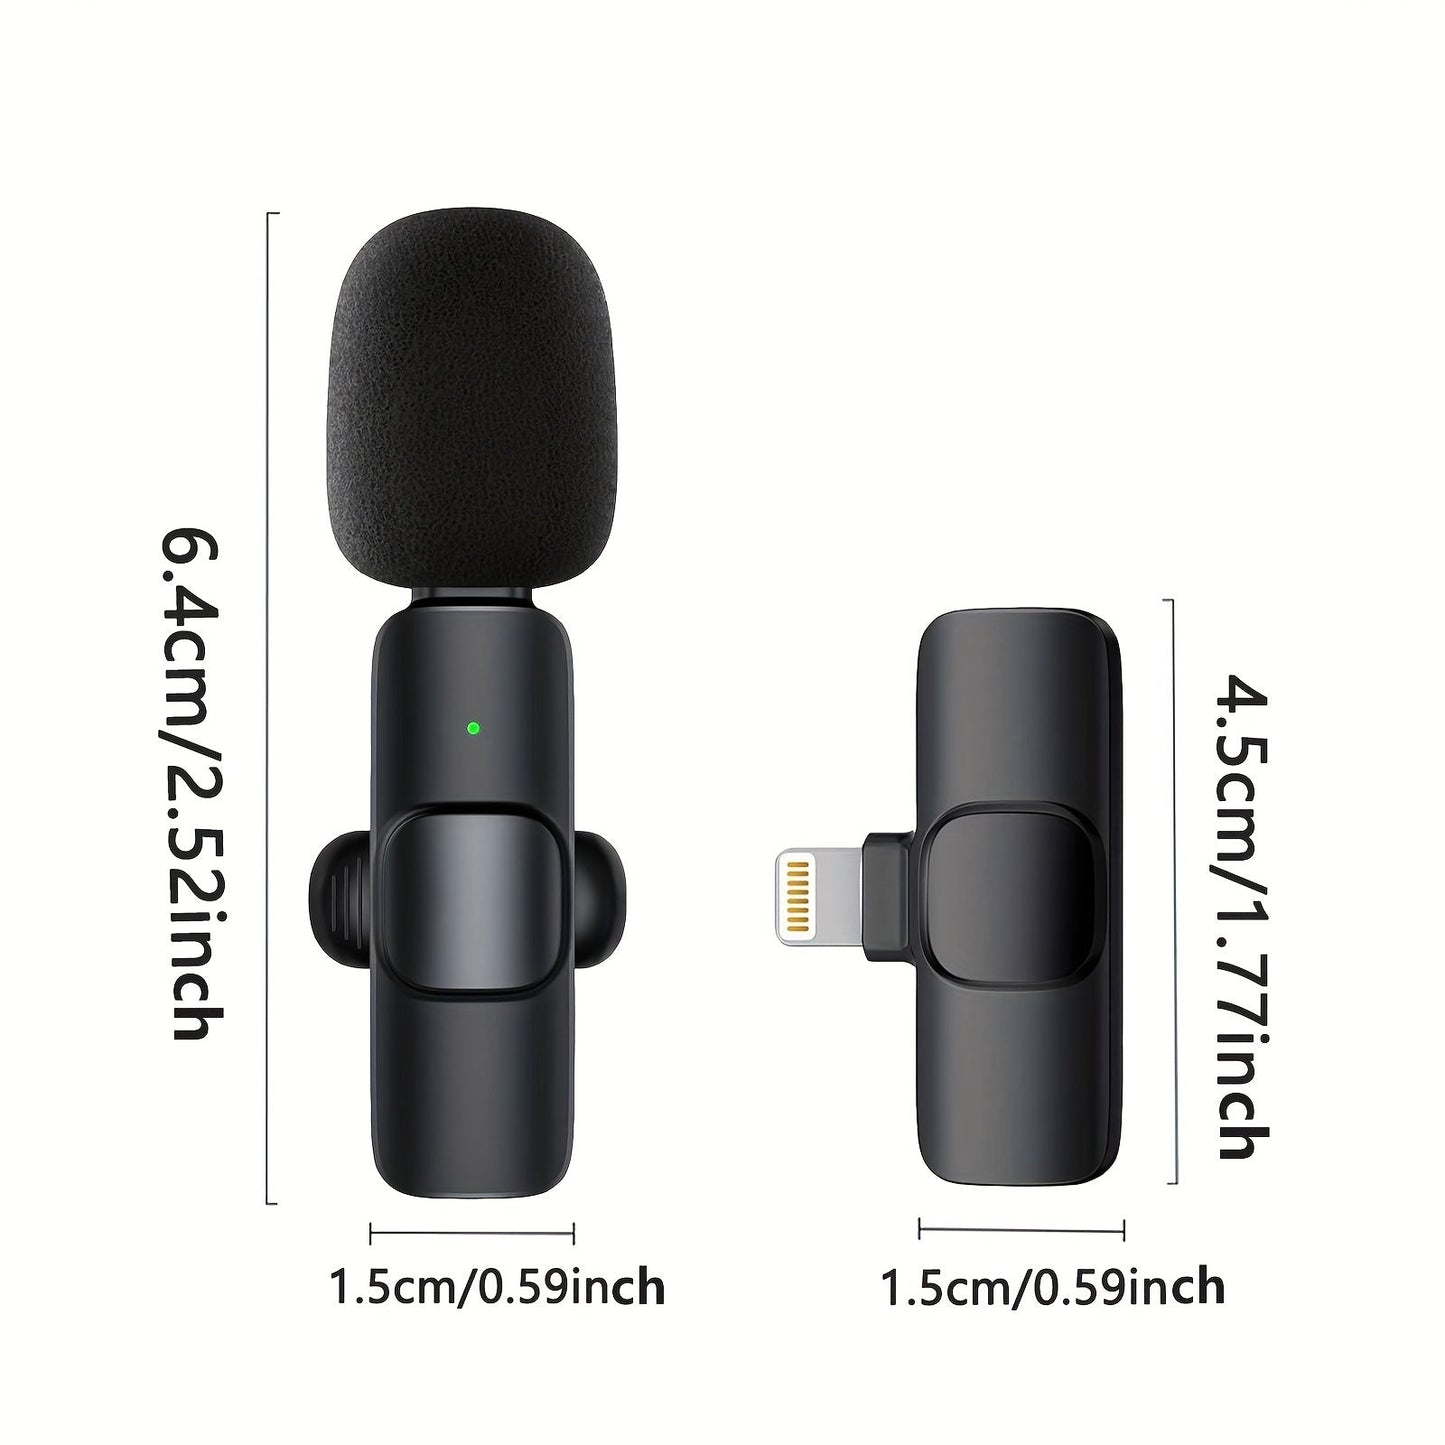 Professional Wireless Lavalier Microphone For IPhone IPad Android Phone Laptop PC Wireless Omnidirectional Condenser Recording Microphone For Interview Video Podcast Vlog